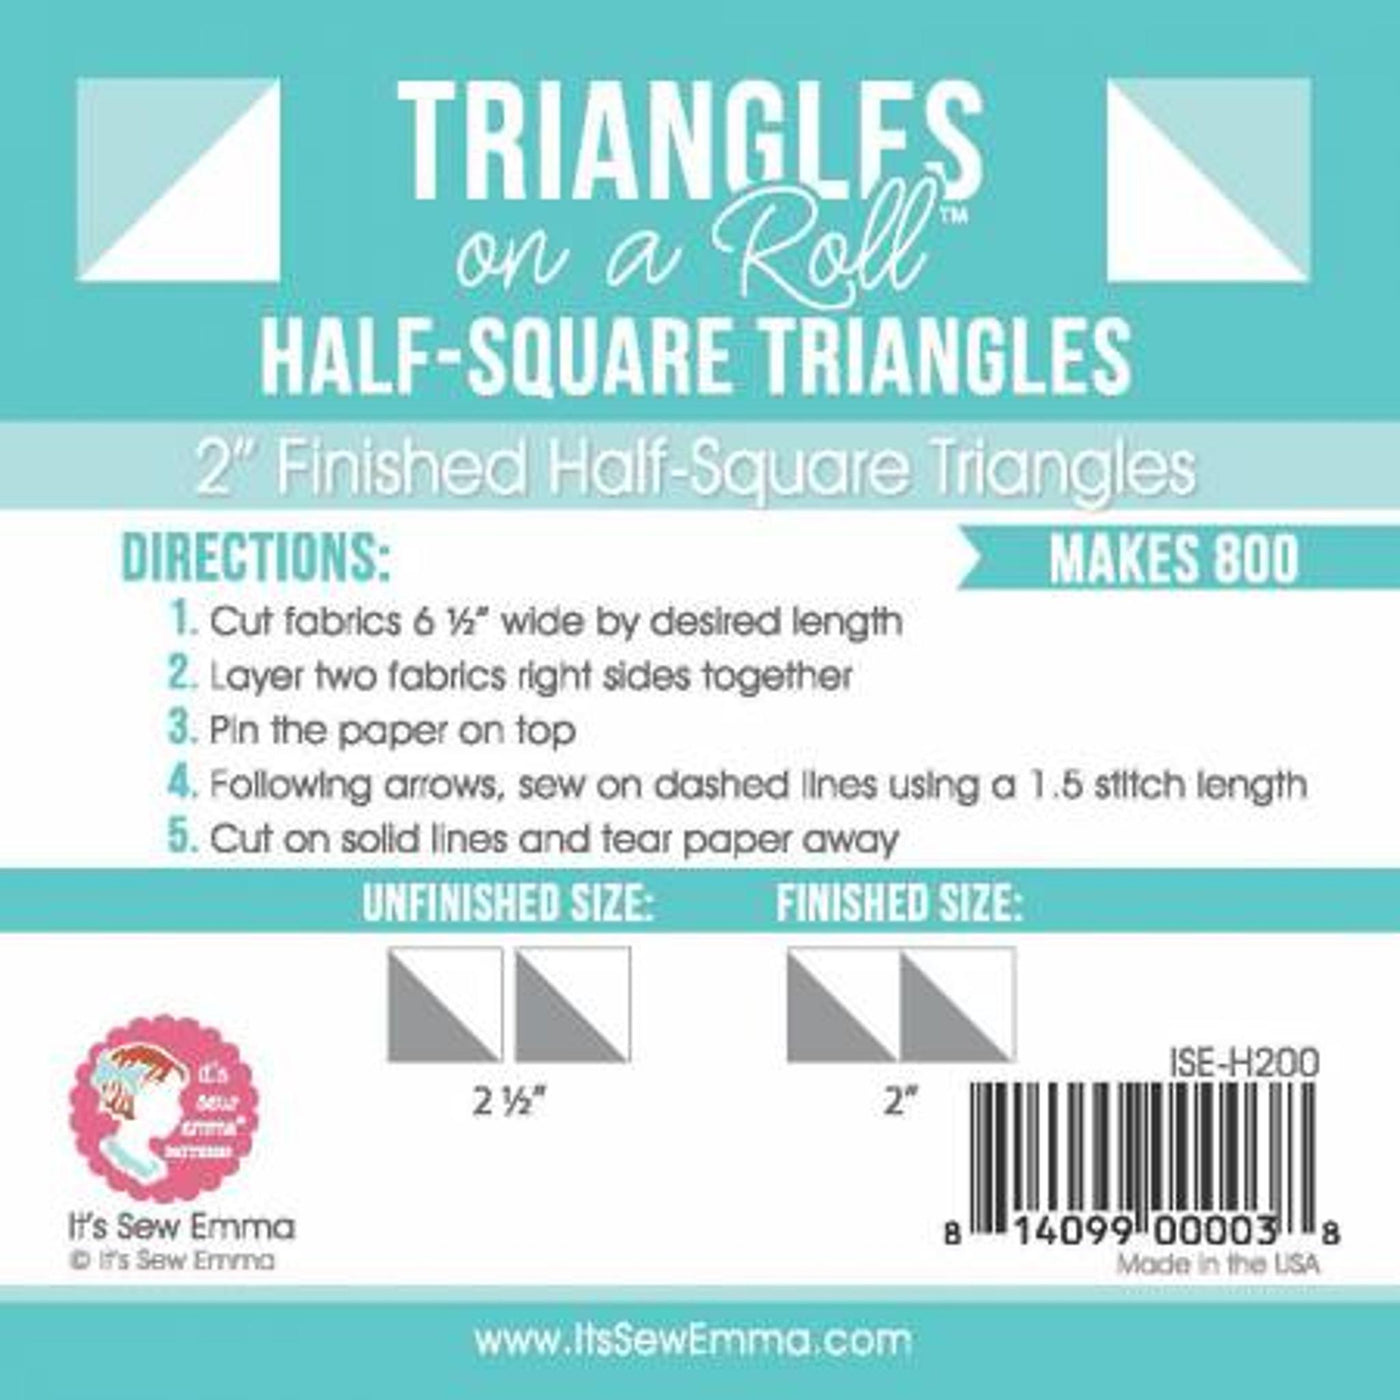 Triangles on a Roll - 2"" Half-square triangles